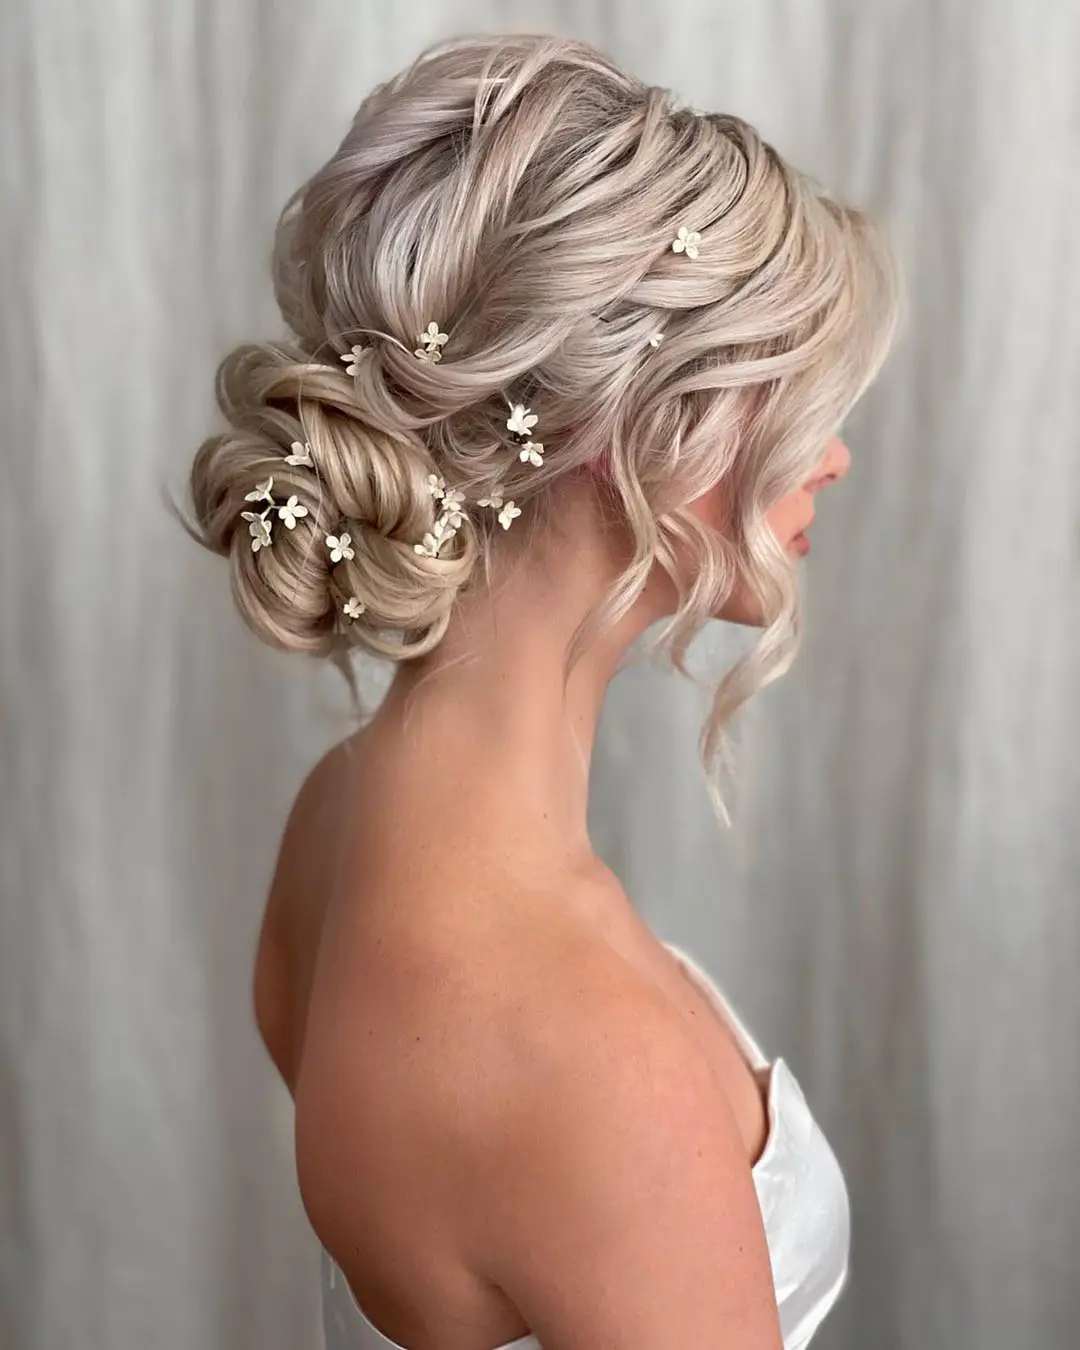 Classic low curly updo